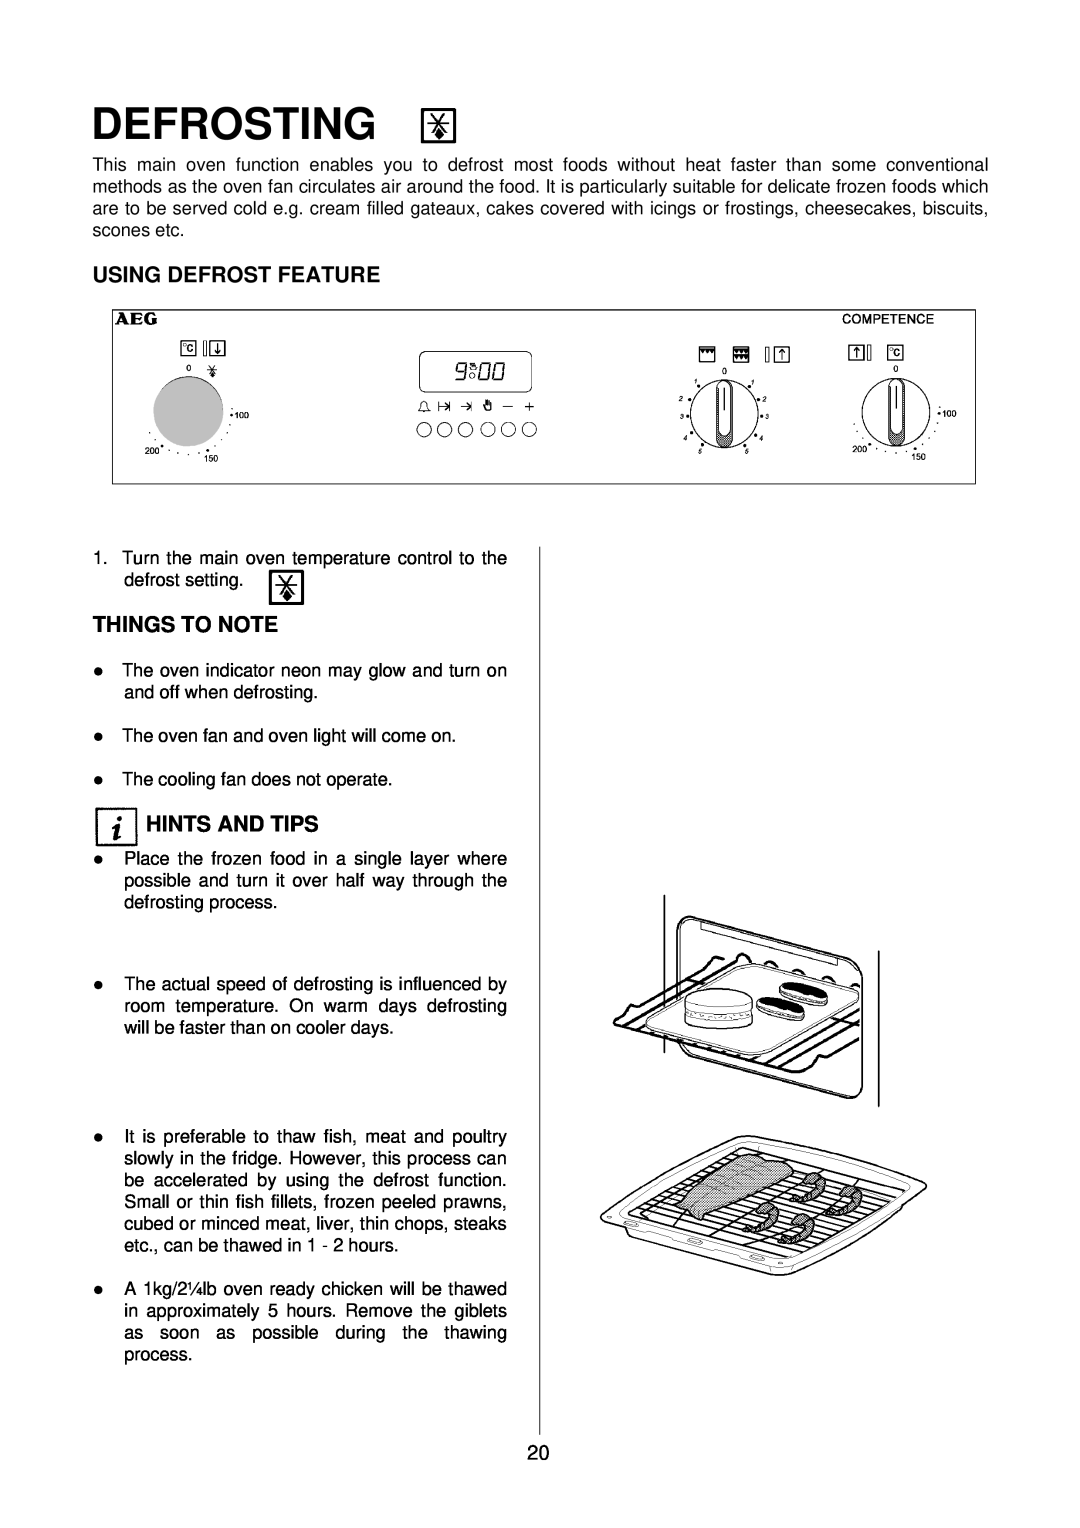 Electrolux D2160 installation instructions Defrosting, Using Defrost Feature, Things To Note, Hints And Tips 